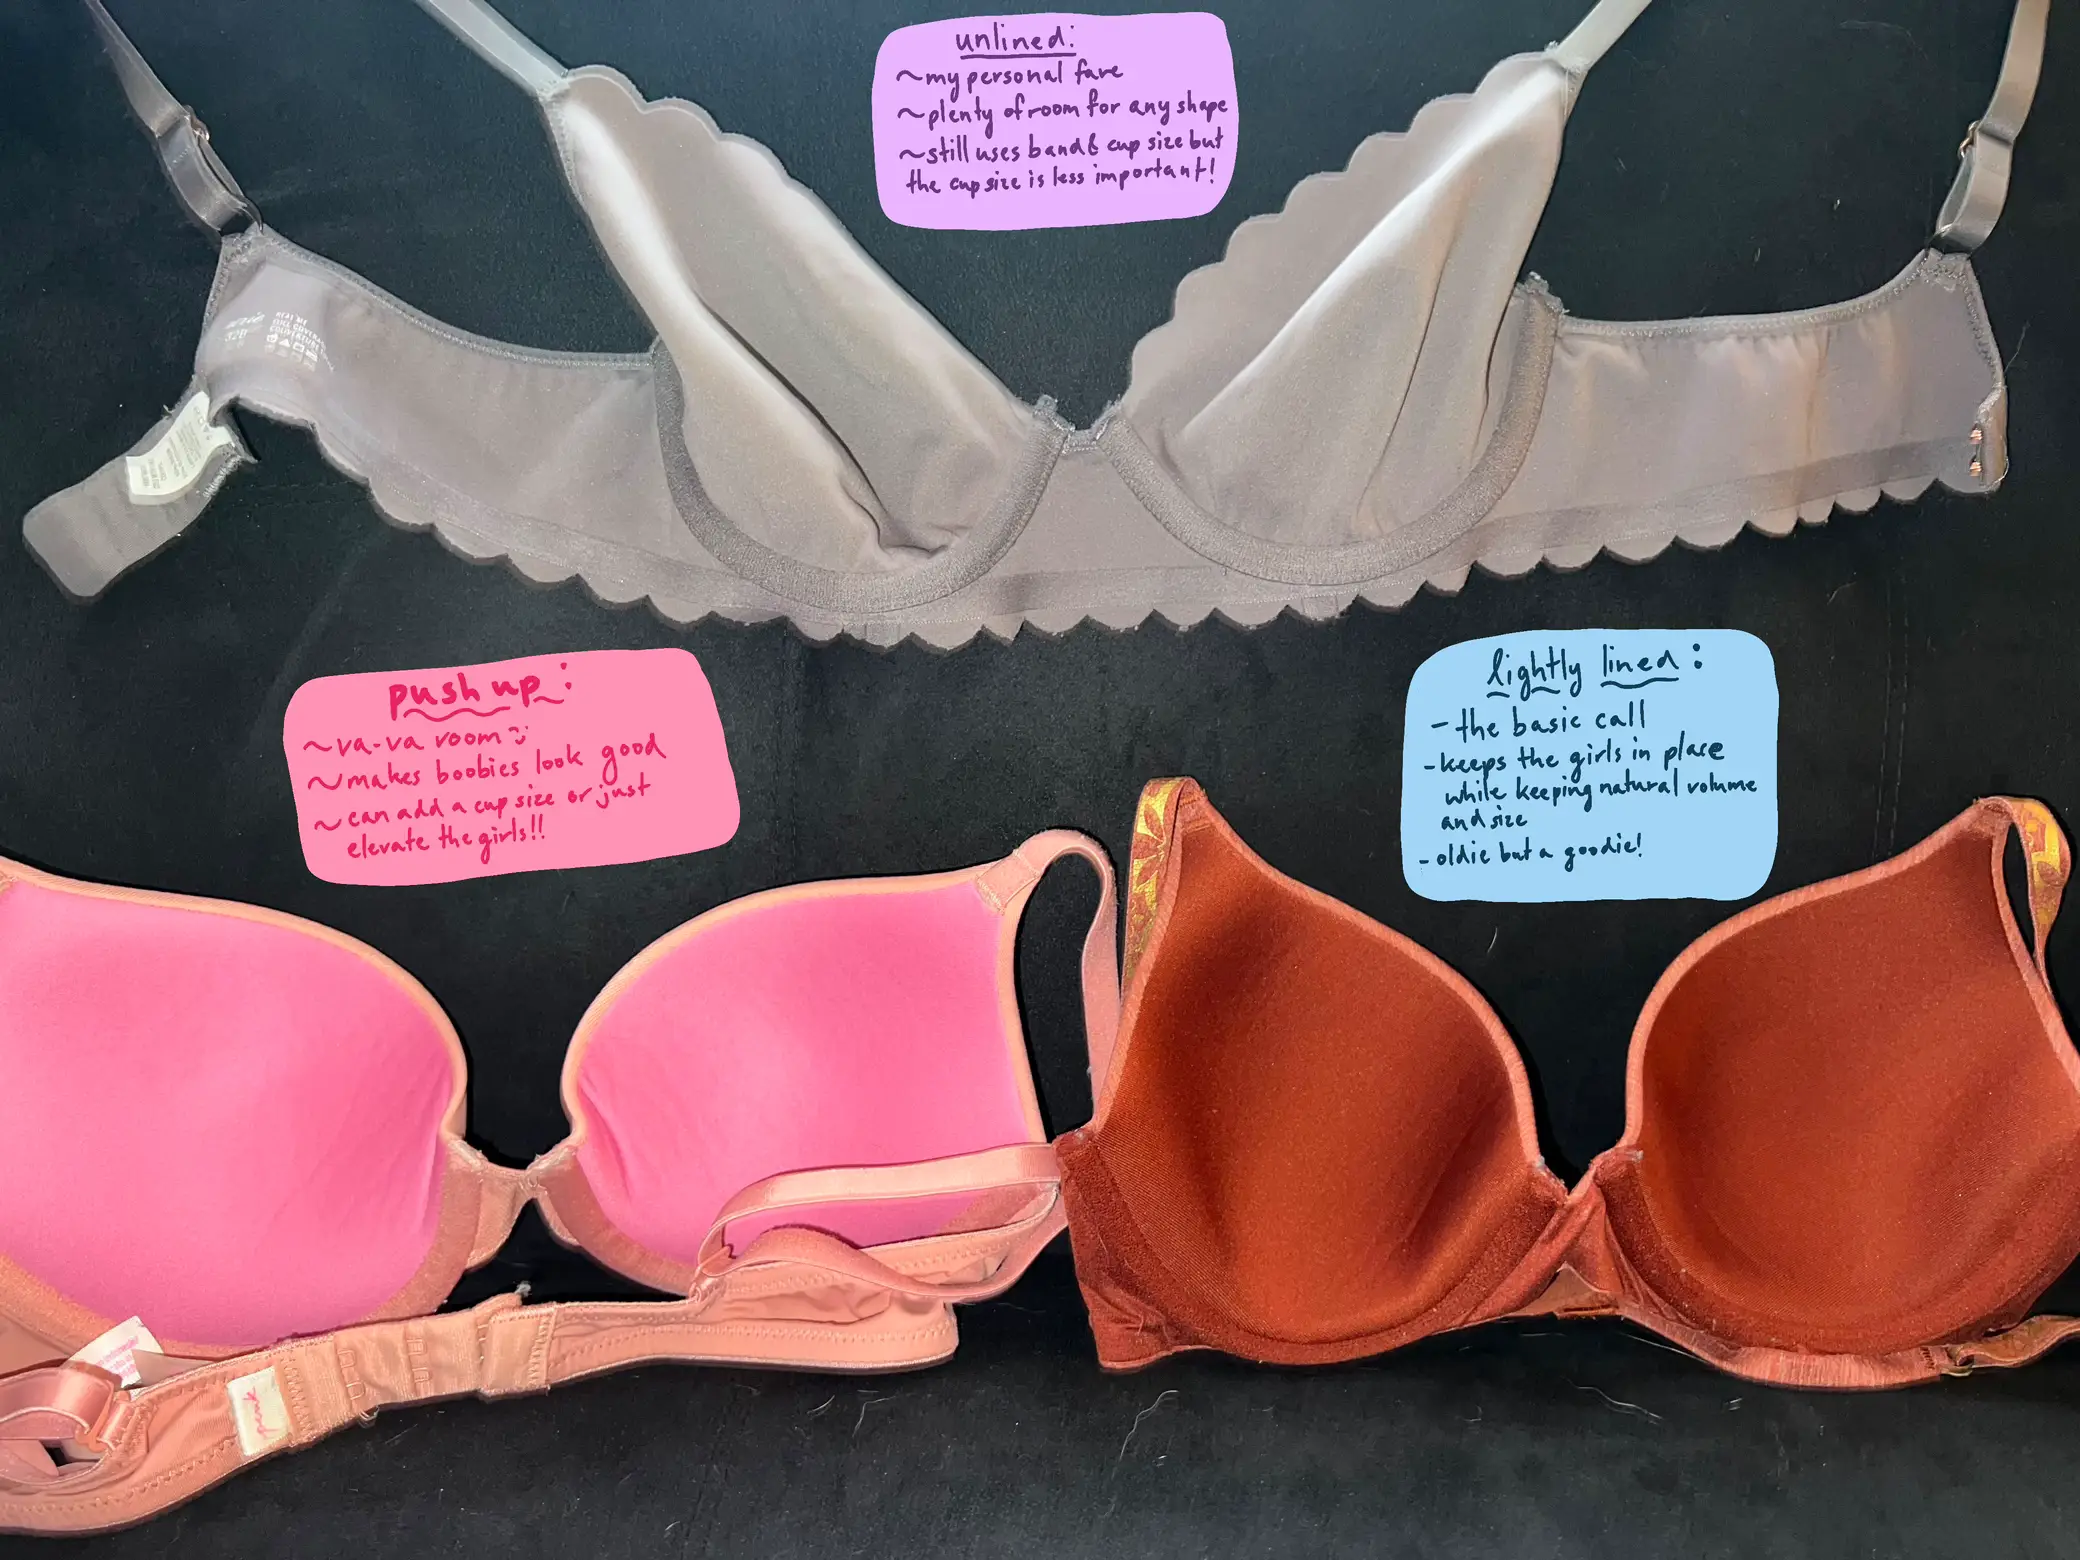 Let's talk bras babes 🩷, Gallery posted by ani and subie